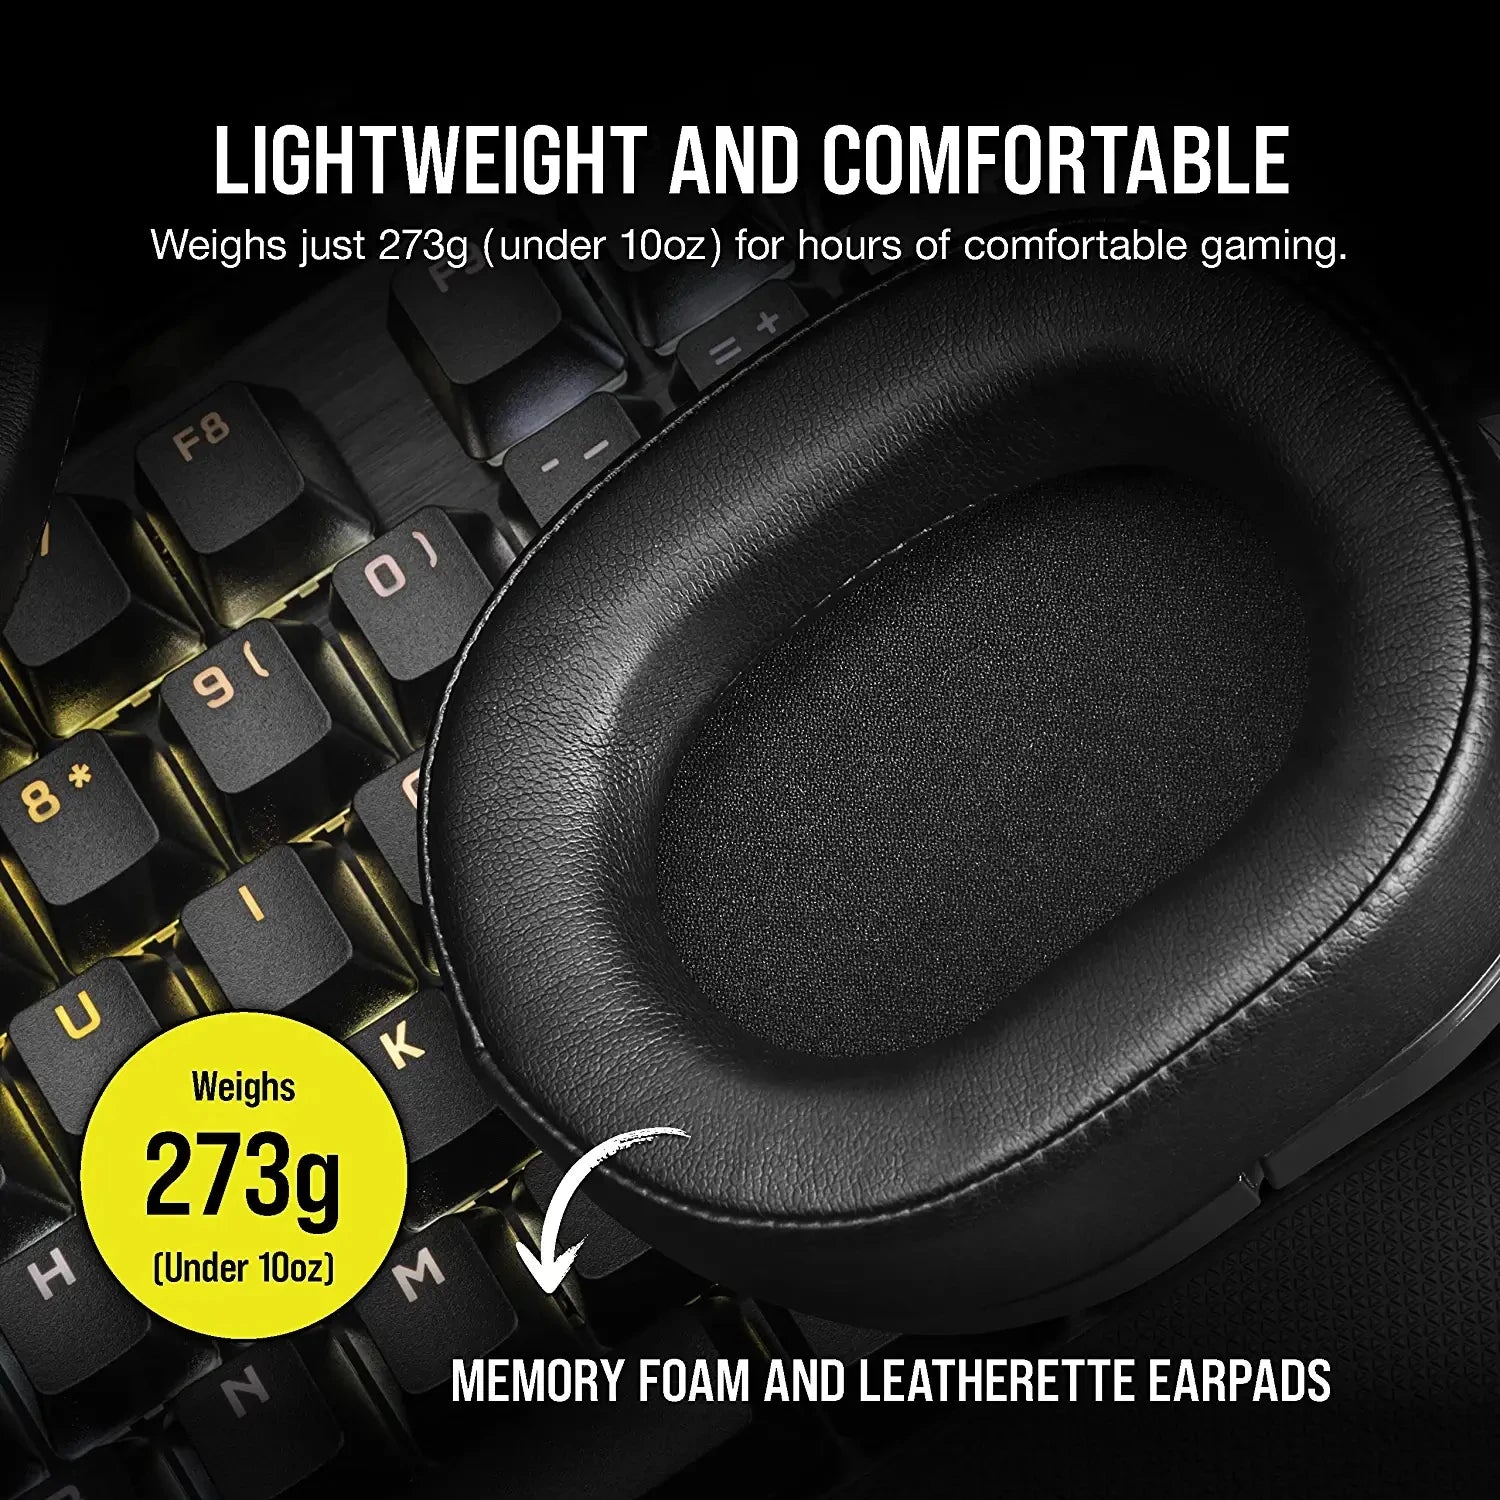 Corsair HS55 Surround Gaming Headset with Leatherette Memory Foam Ear Pads